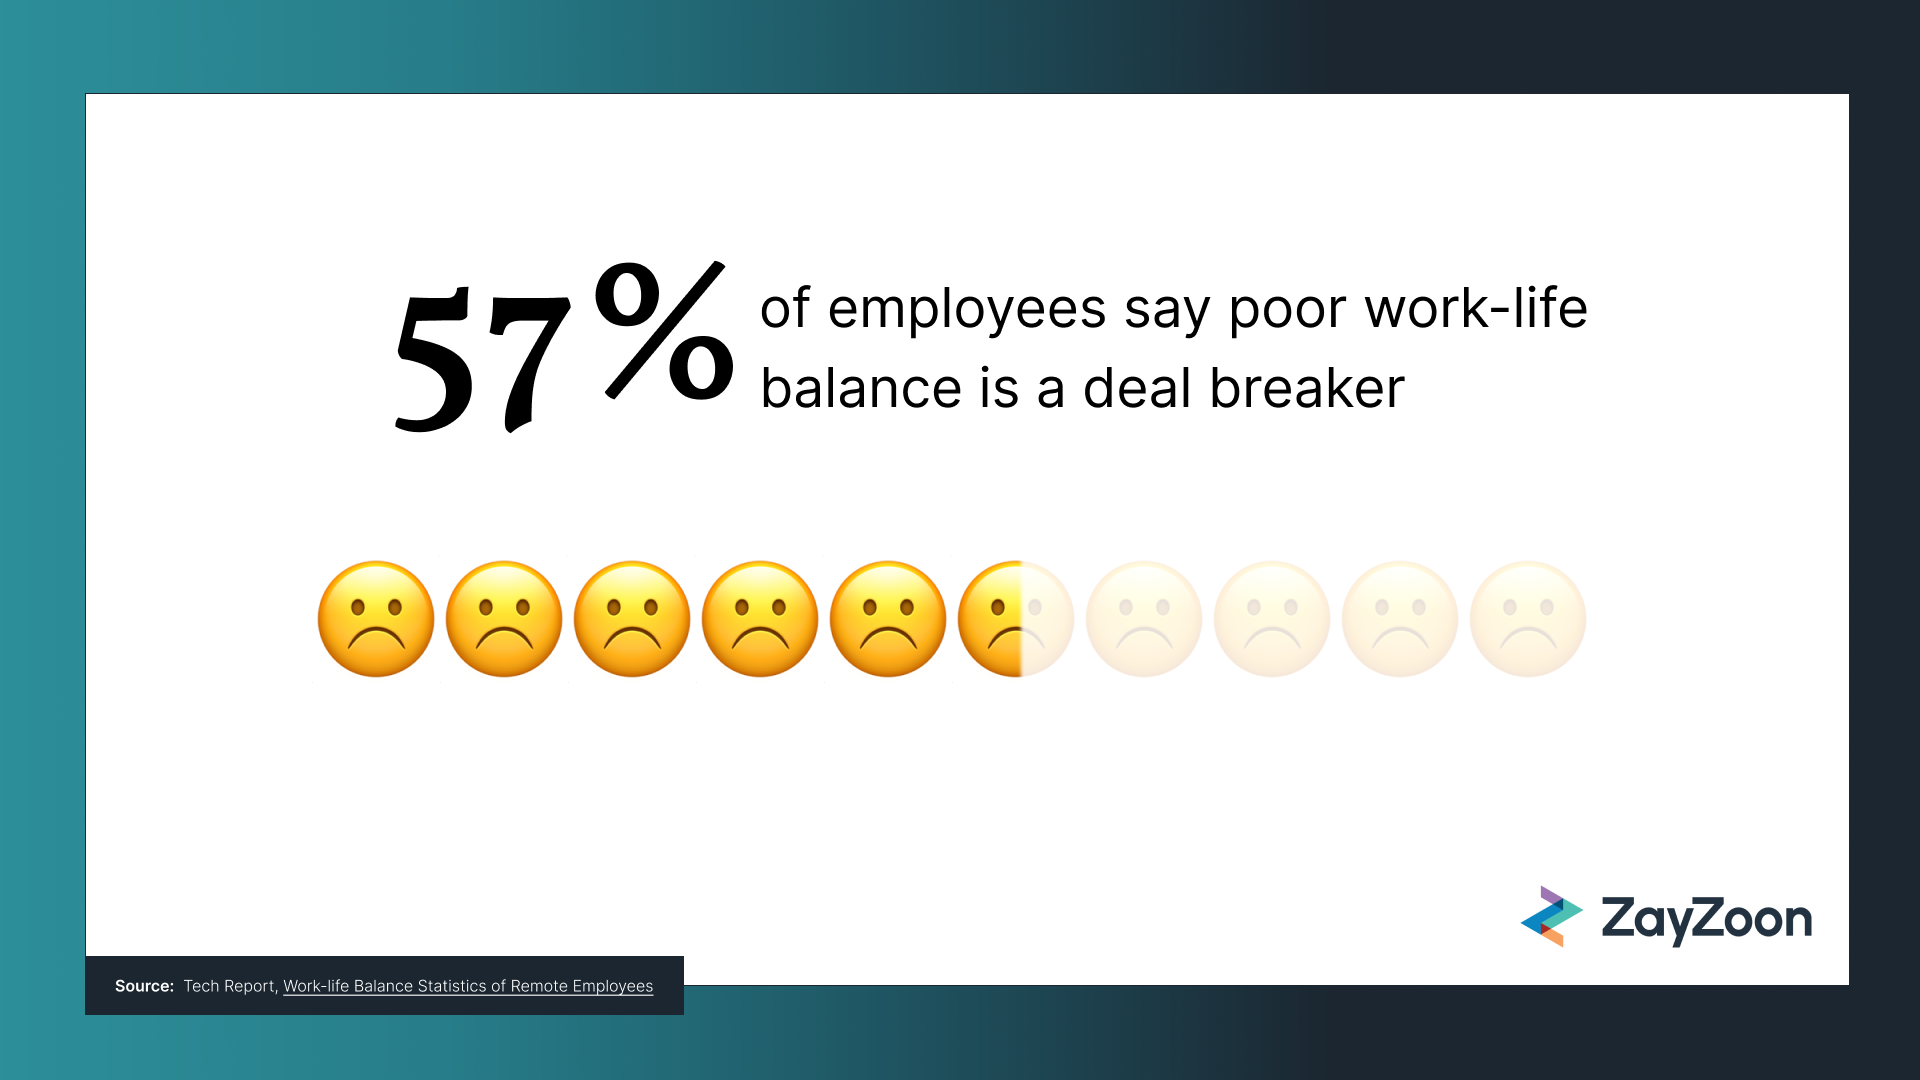 Sad emojis and copy that reads: "57% of employees leave their job because of bad work-life balance."